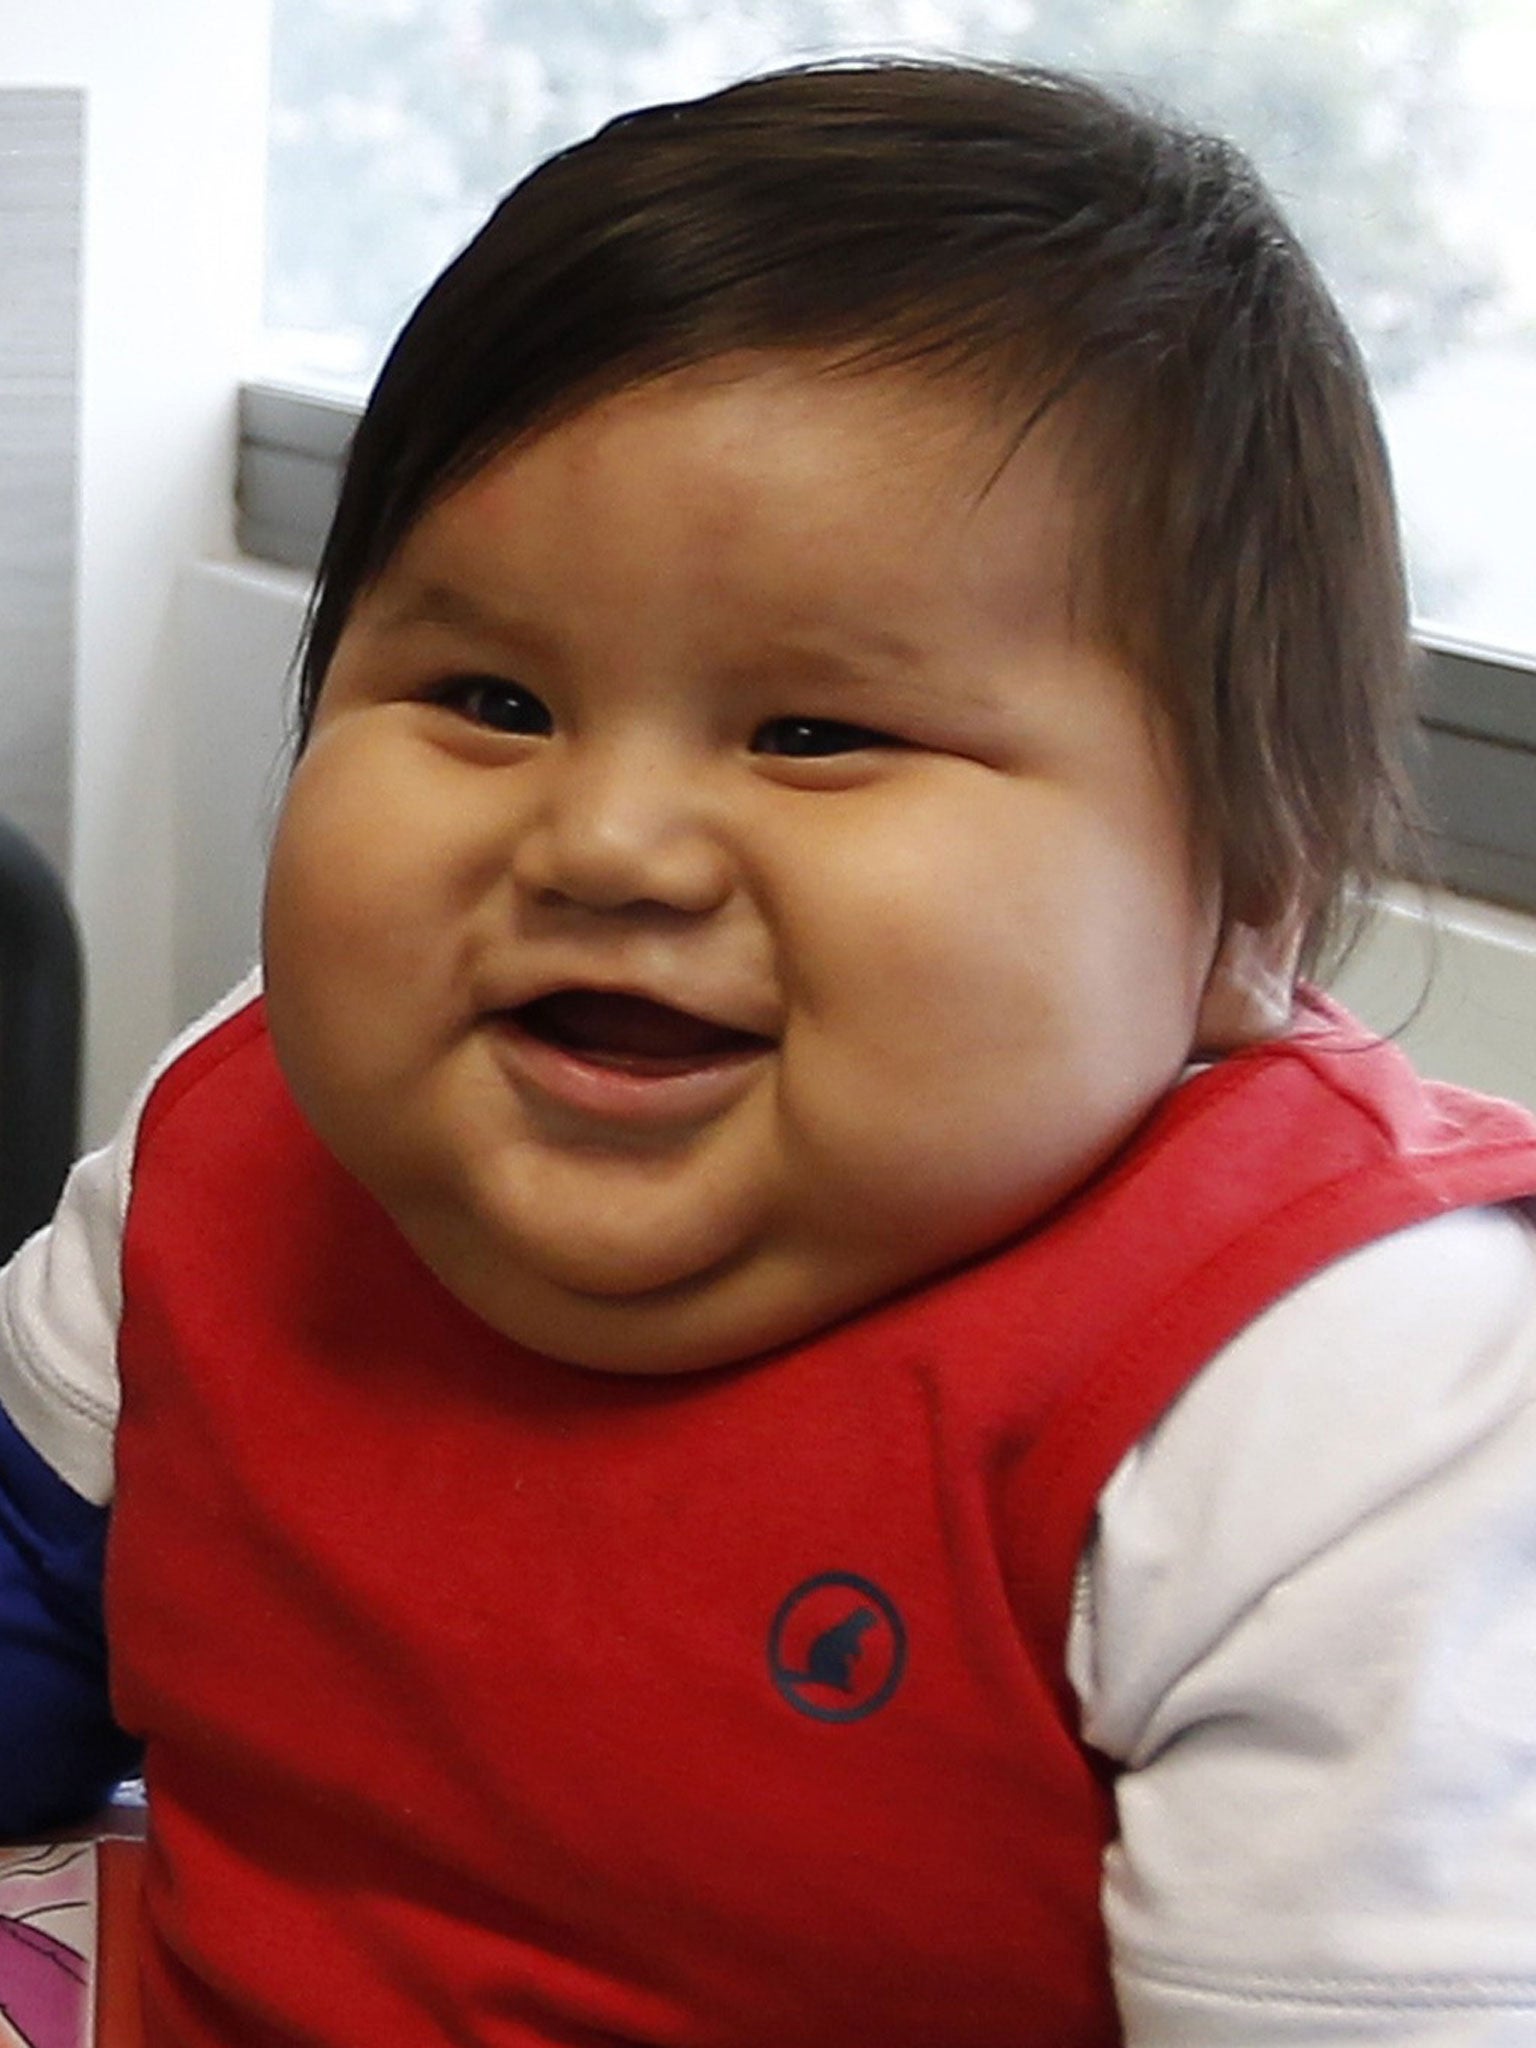 Santiago weighs more than 20 kilos and will be on a diet to lose weight, said therapist Salvador Palacios of a nonprofit organization that cares for obese children